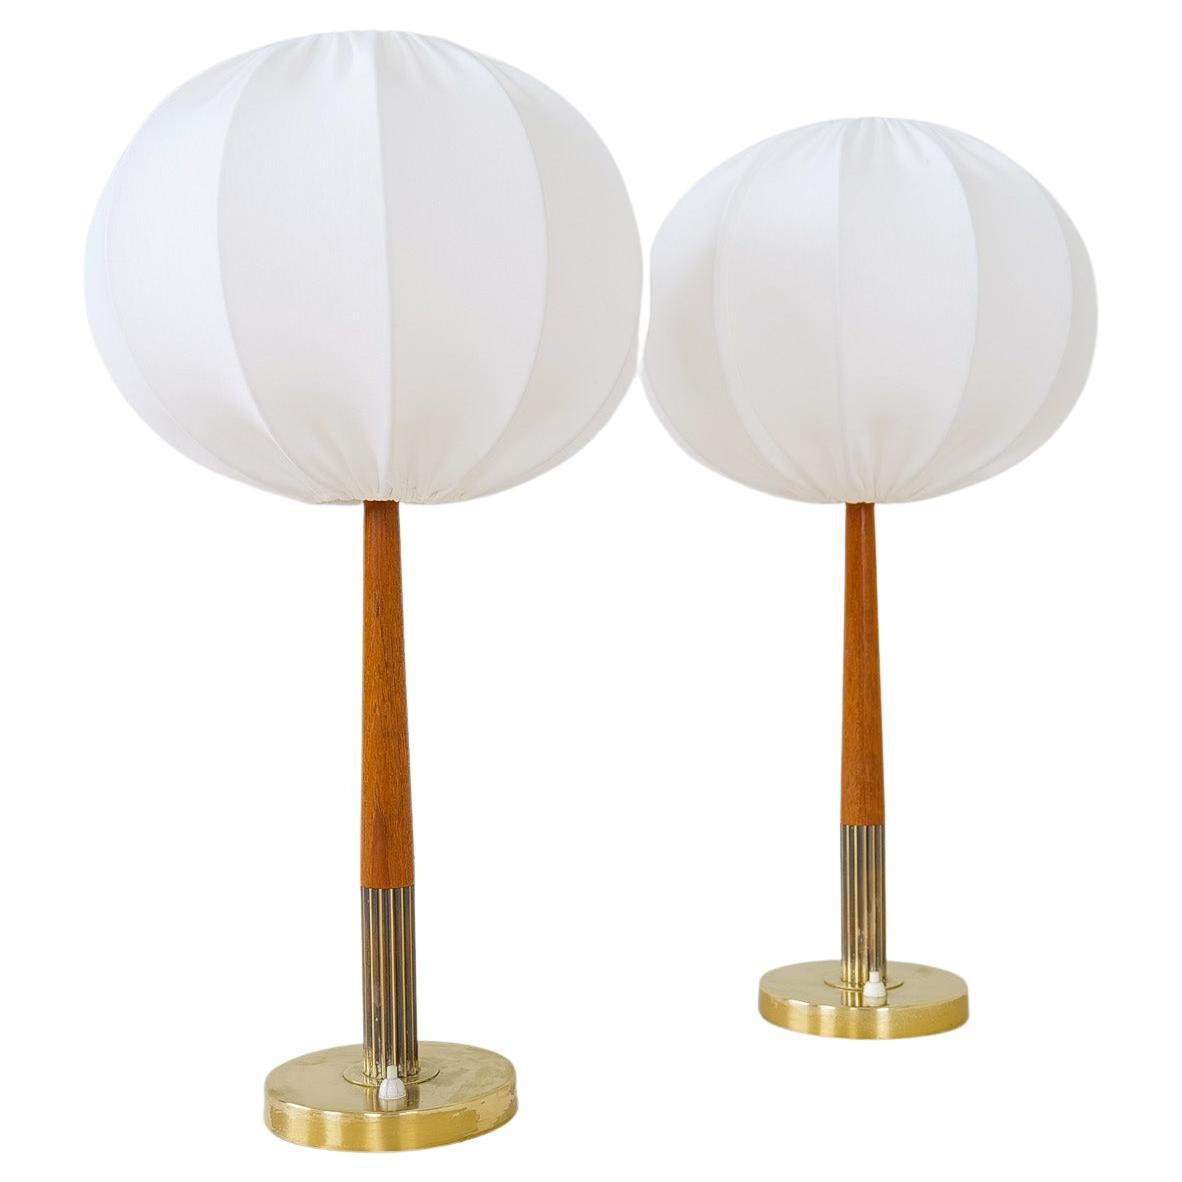 Swedish Midcentury Table Lamps in Brass, Teak and Cotton Shades "Boréns" 1960s For Sale